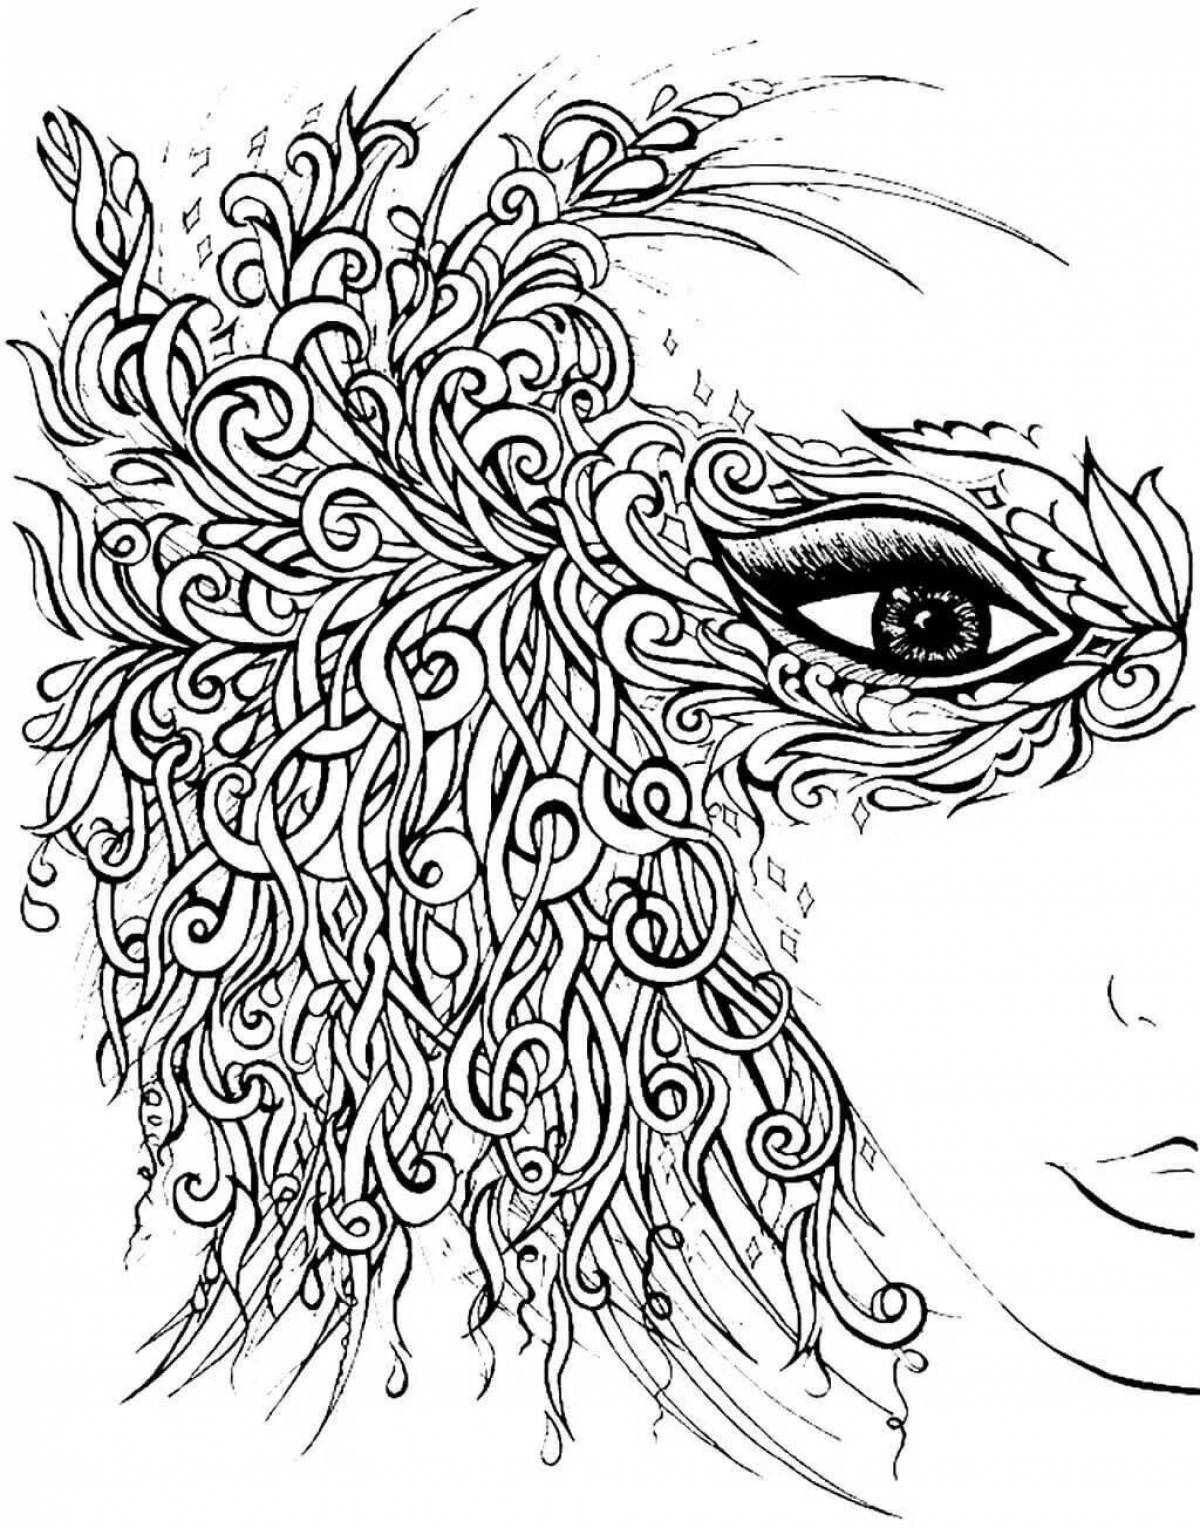 Exquisite adult coloring book